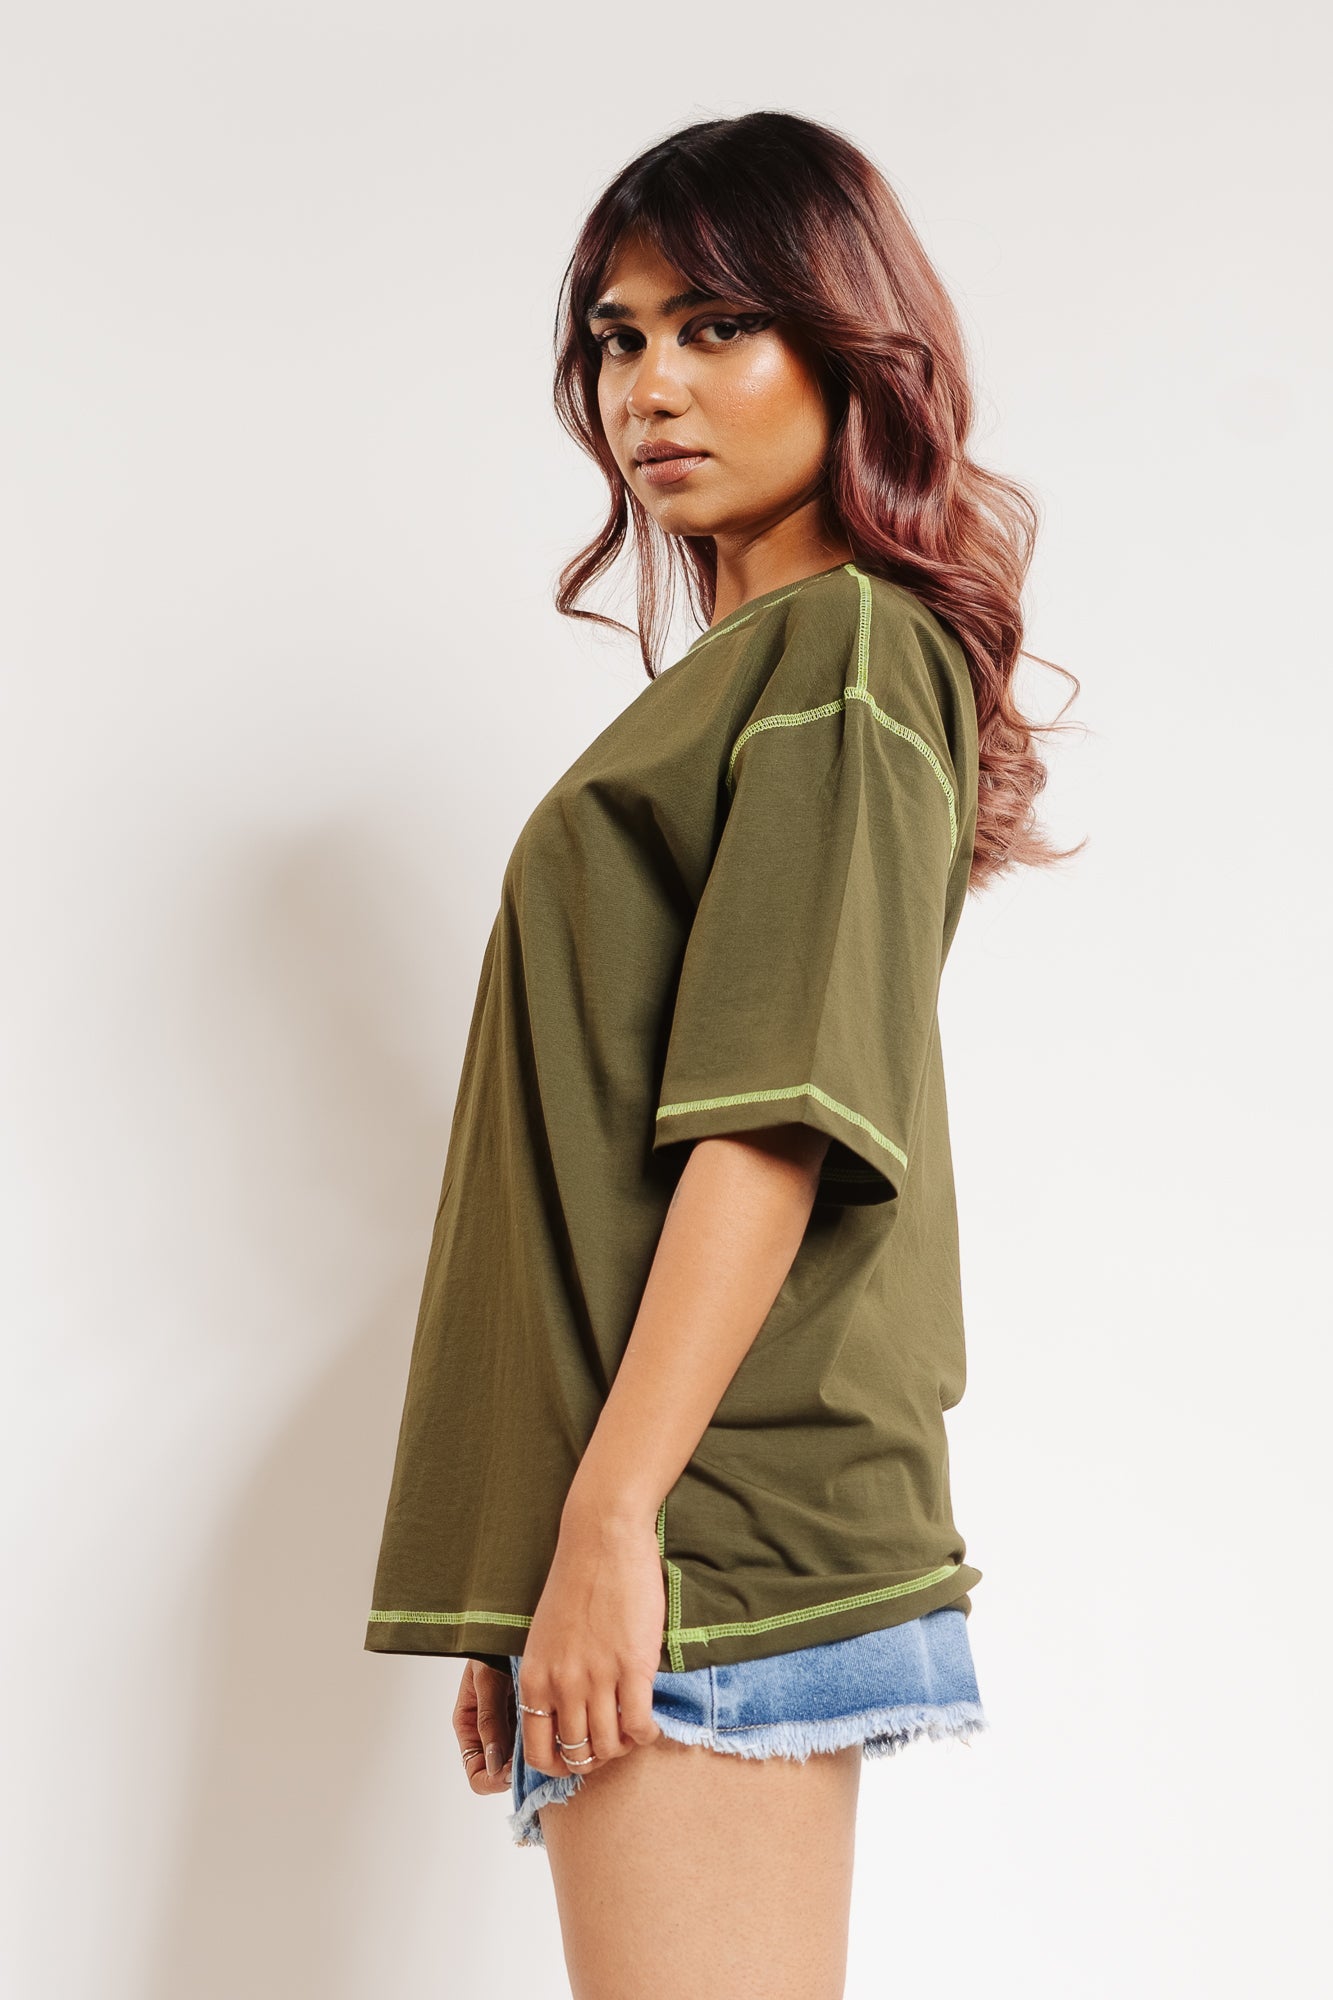 OLIVE TOPSTITCHED OVERSIZED TEES